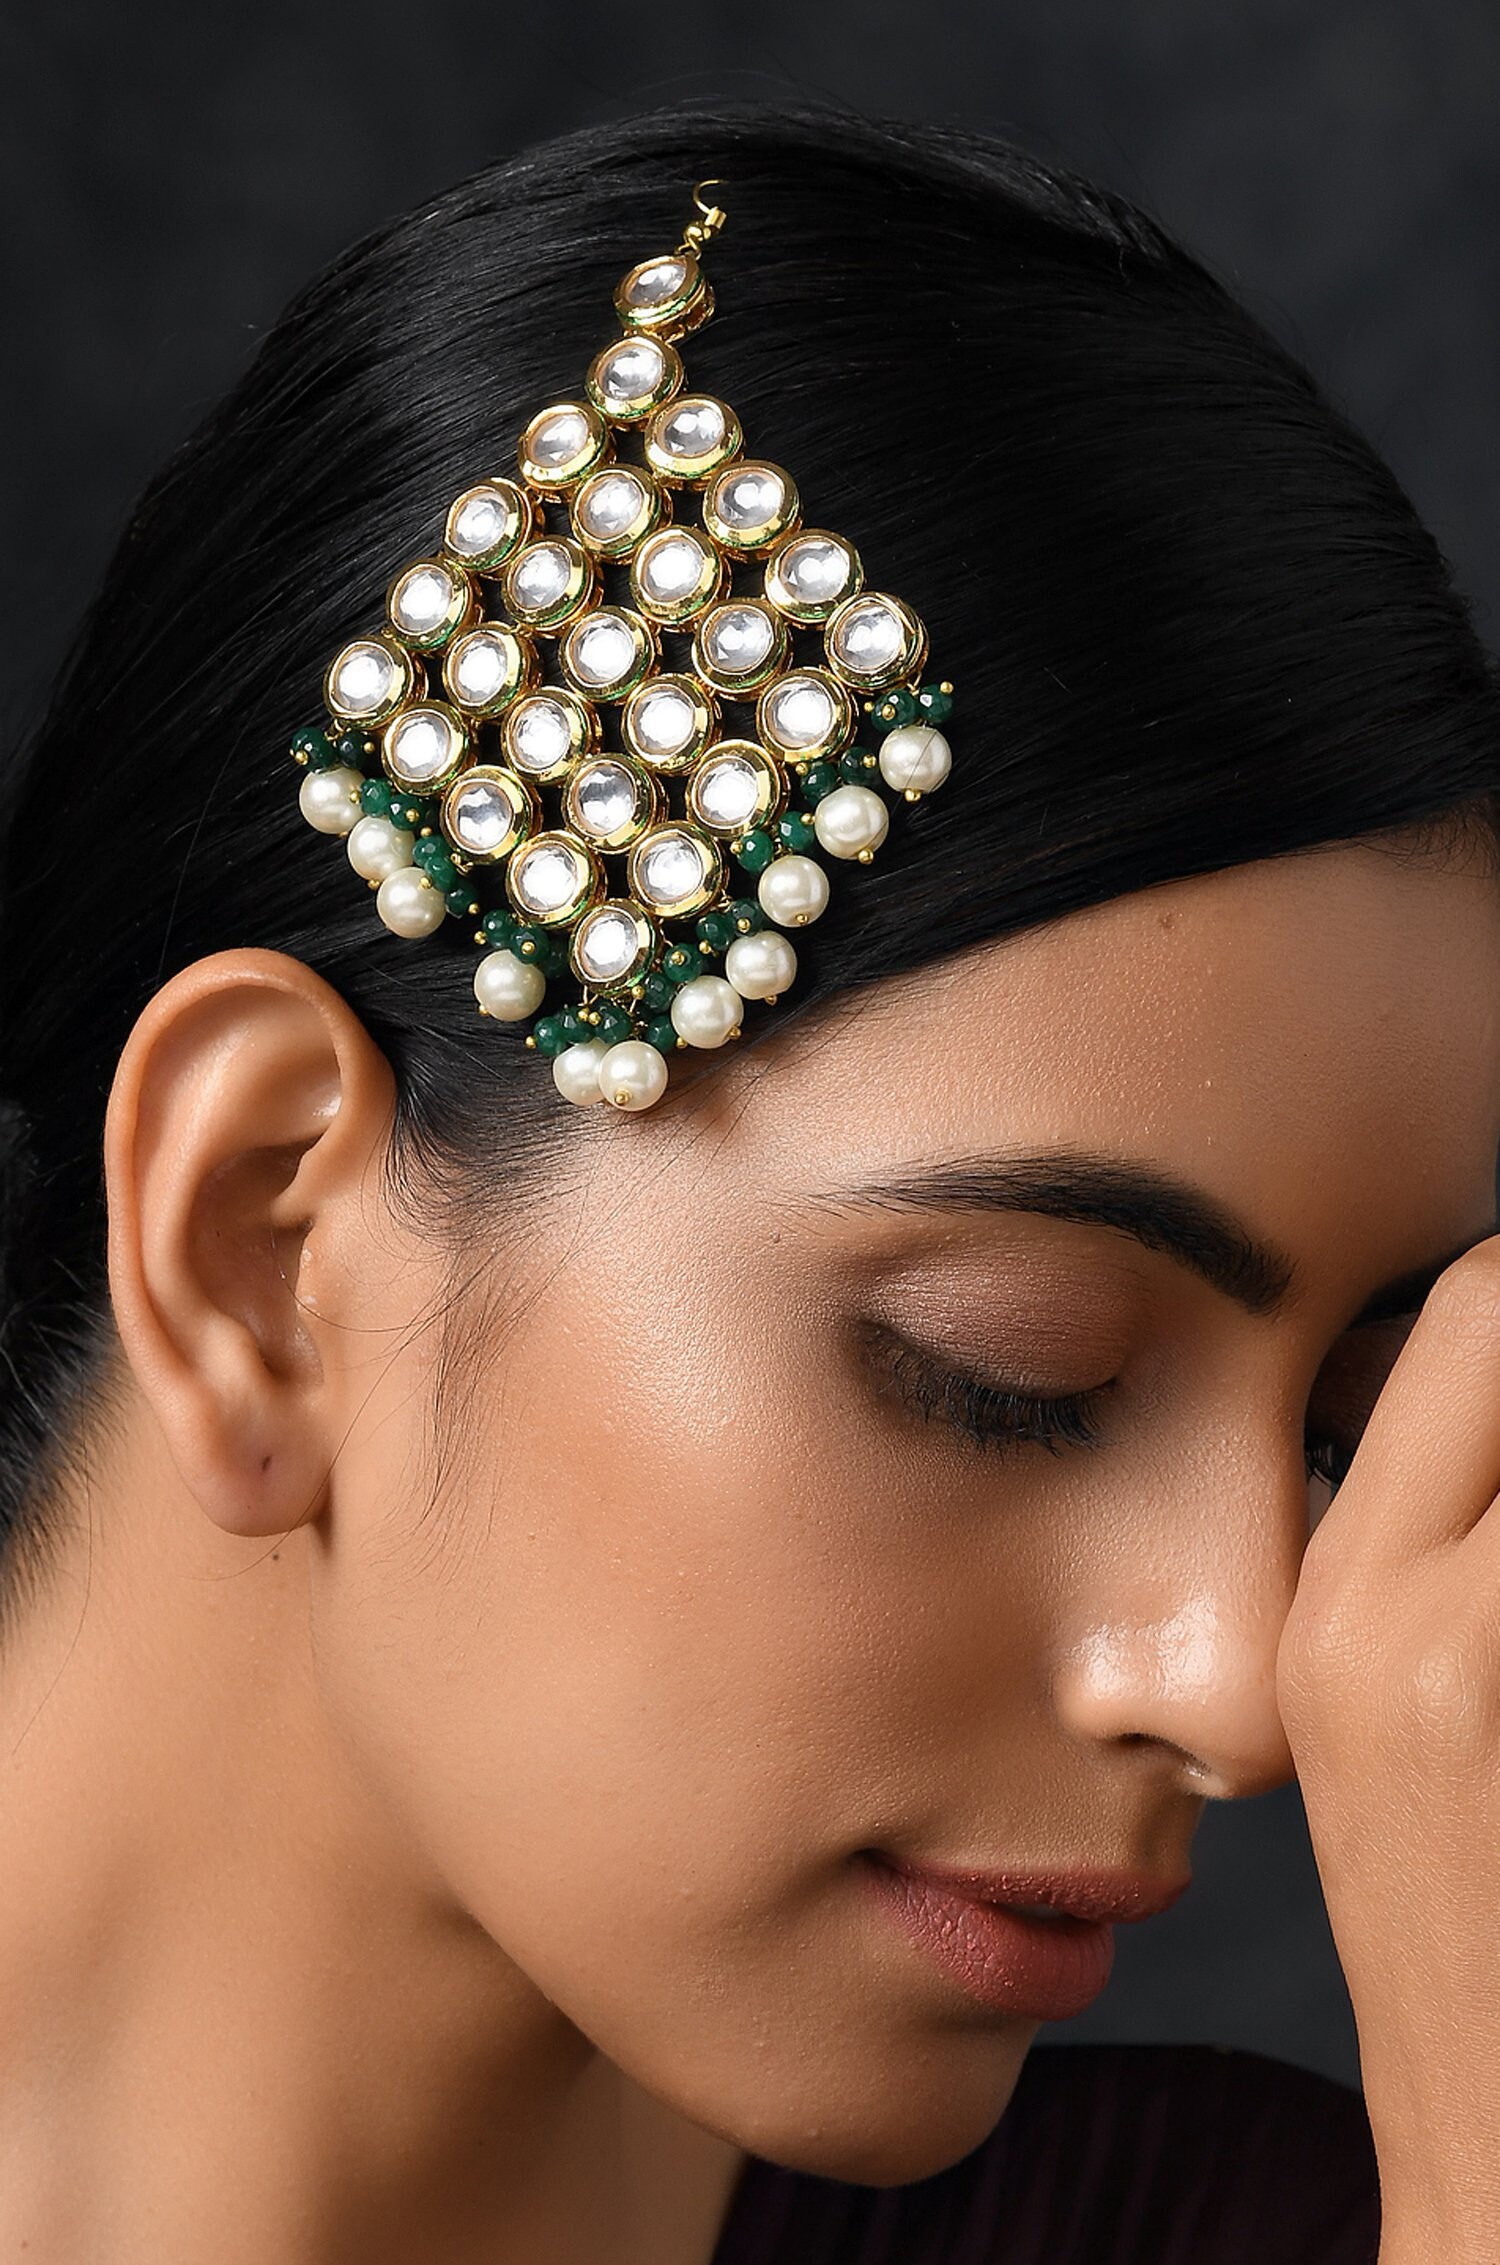 When your hair jewellery needs attention too!-Shaandaar Events